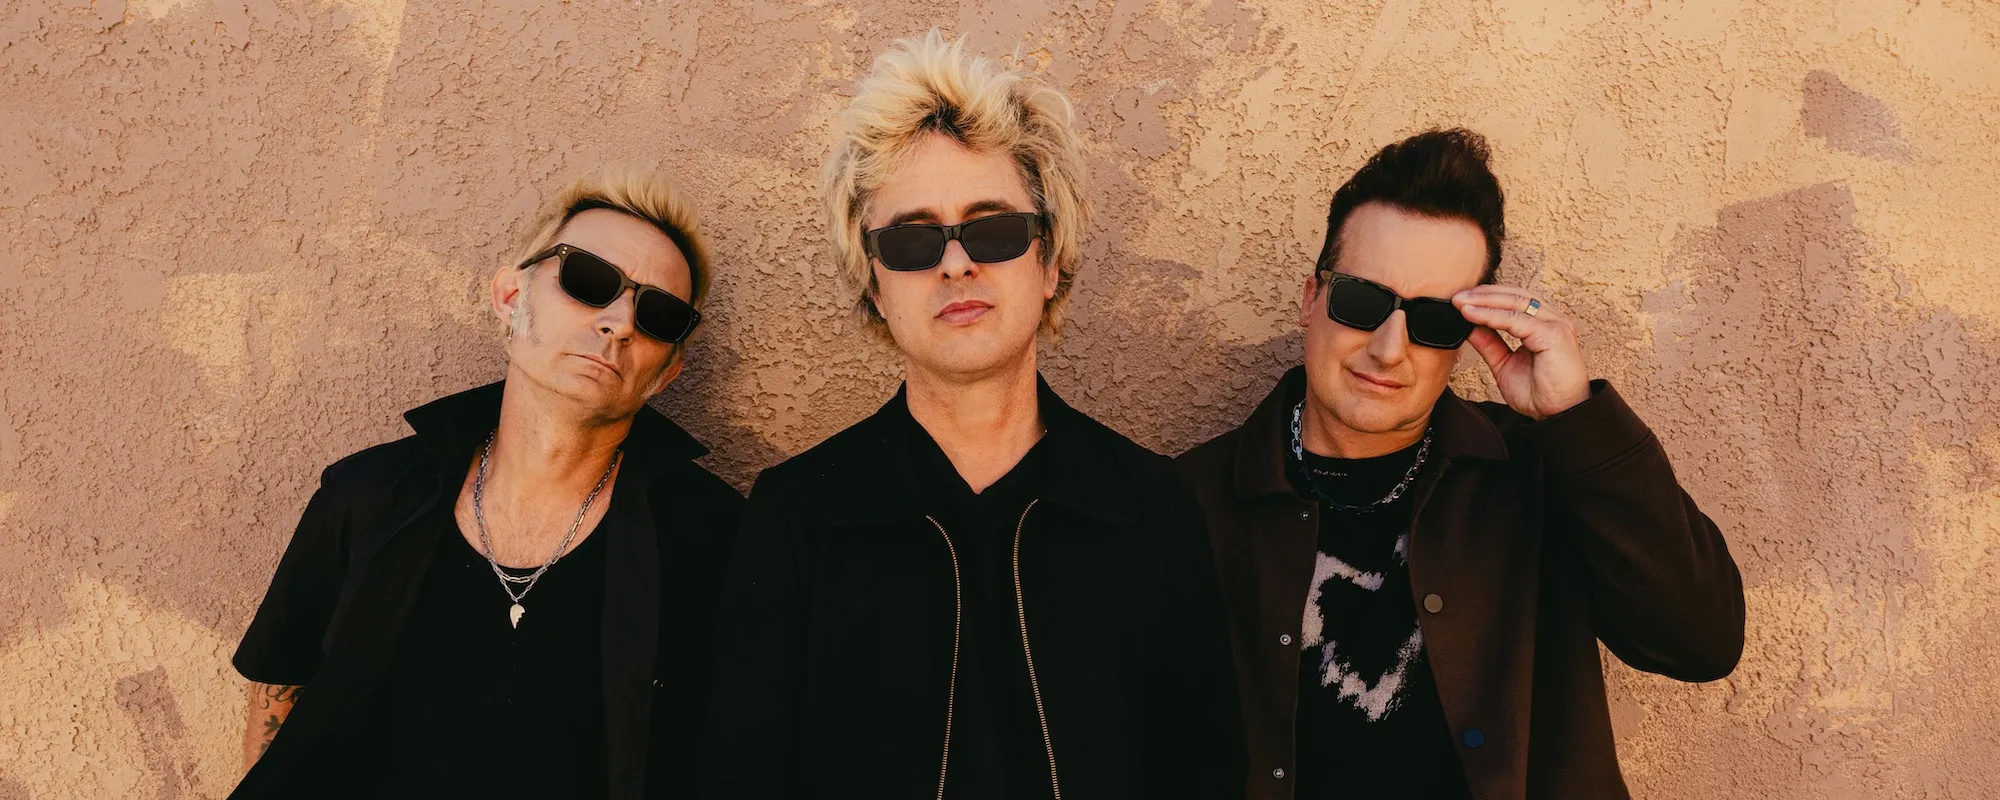 Green Day Reveals 14th Album ‘Saviors,’ Zombified Video for Lead Single “The American Dream is Killing Me”